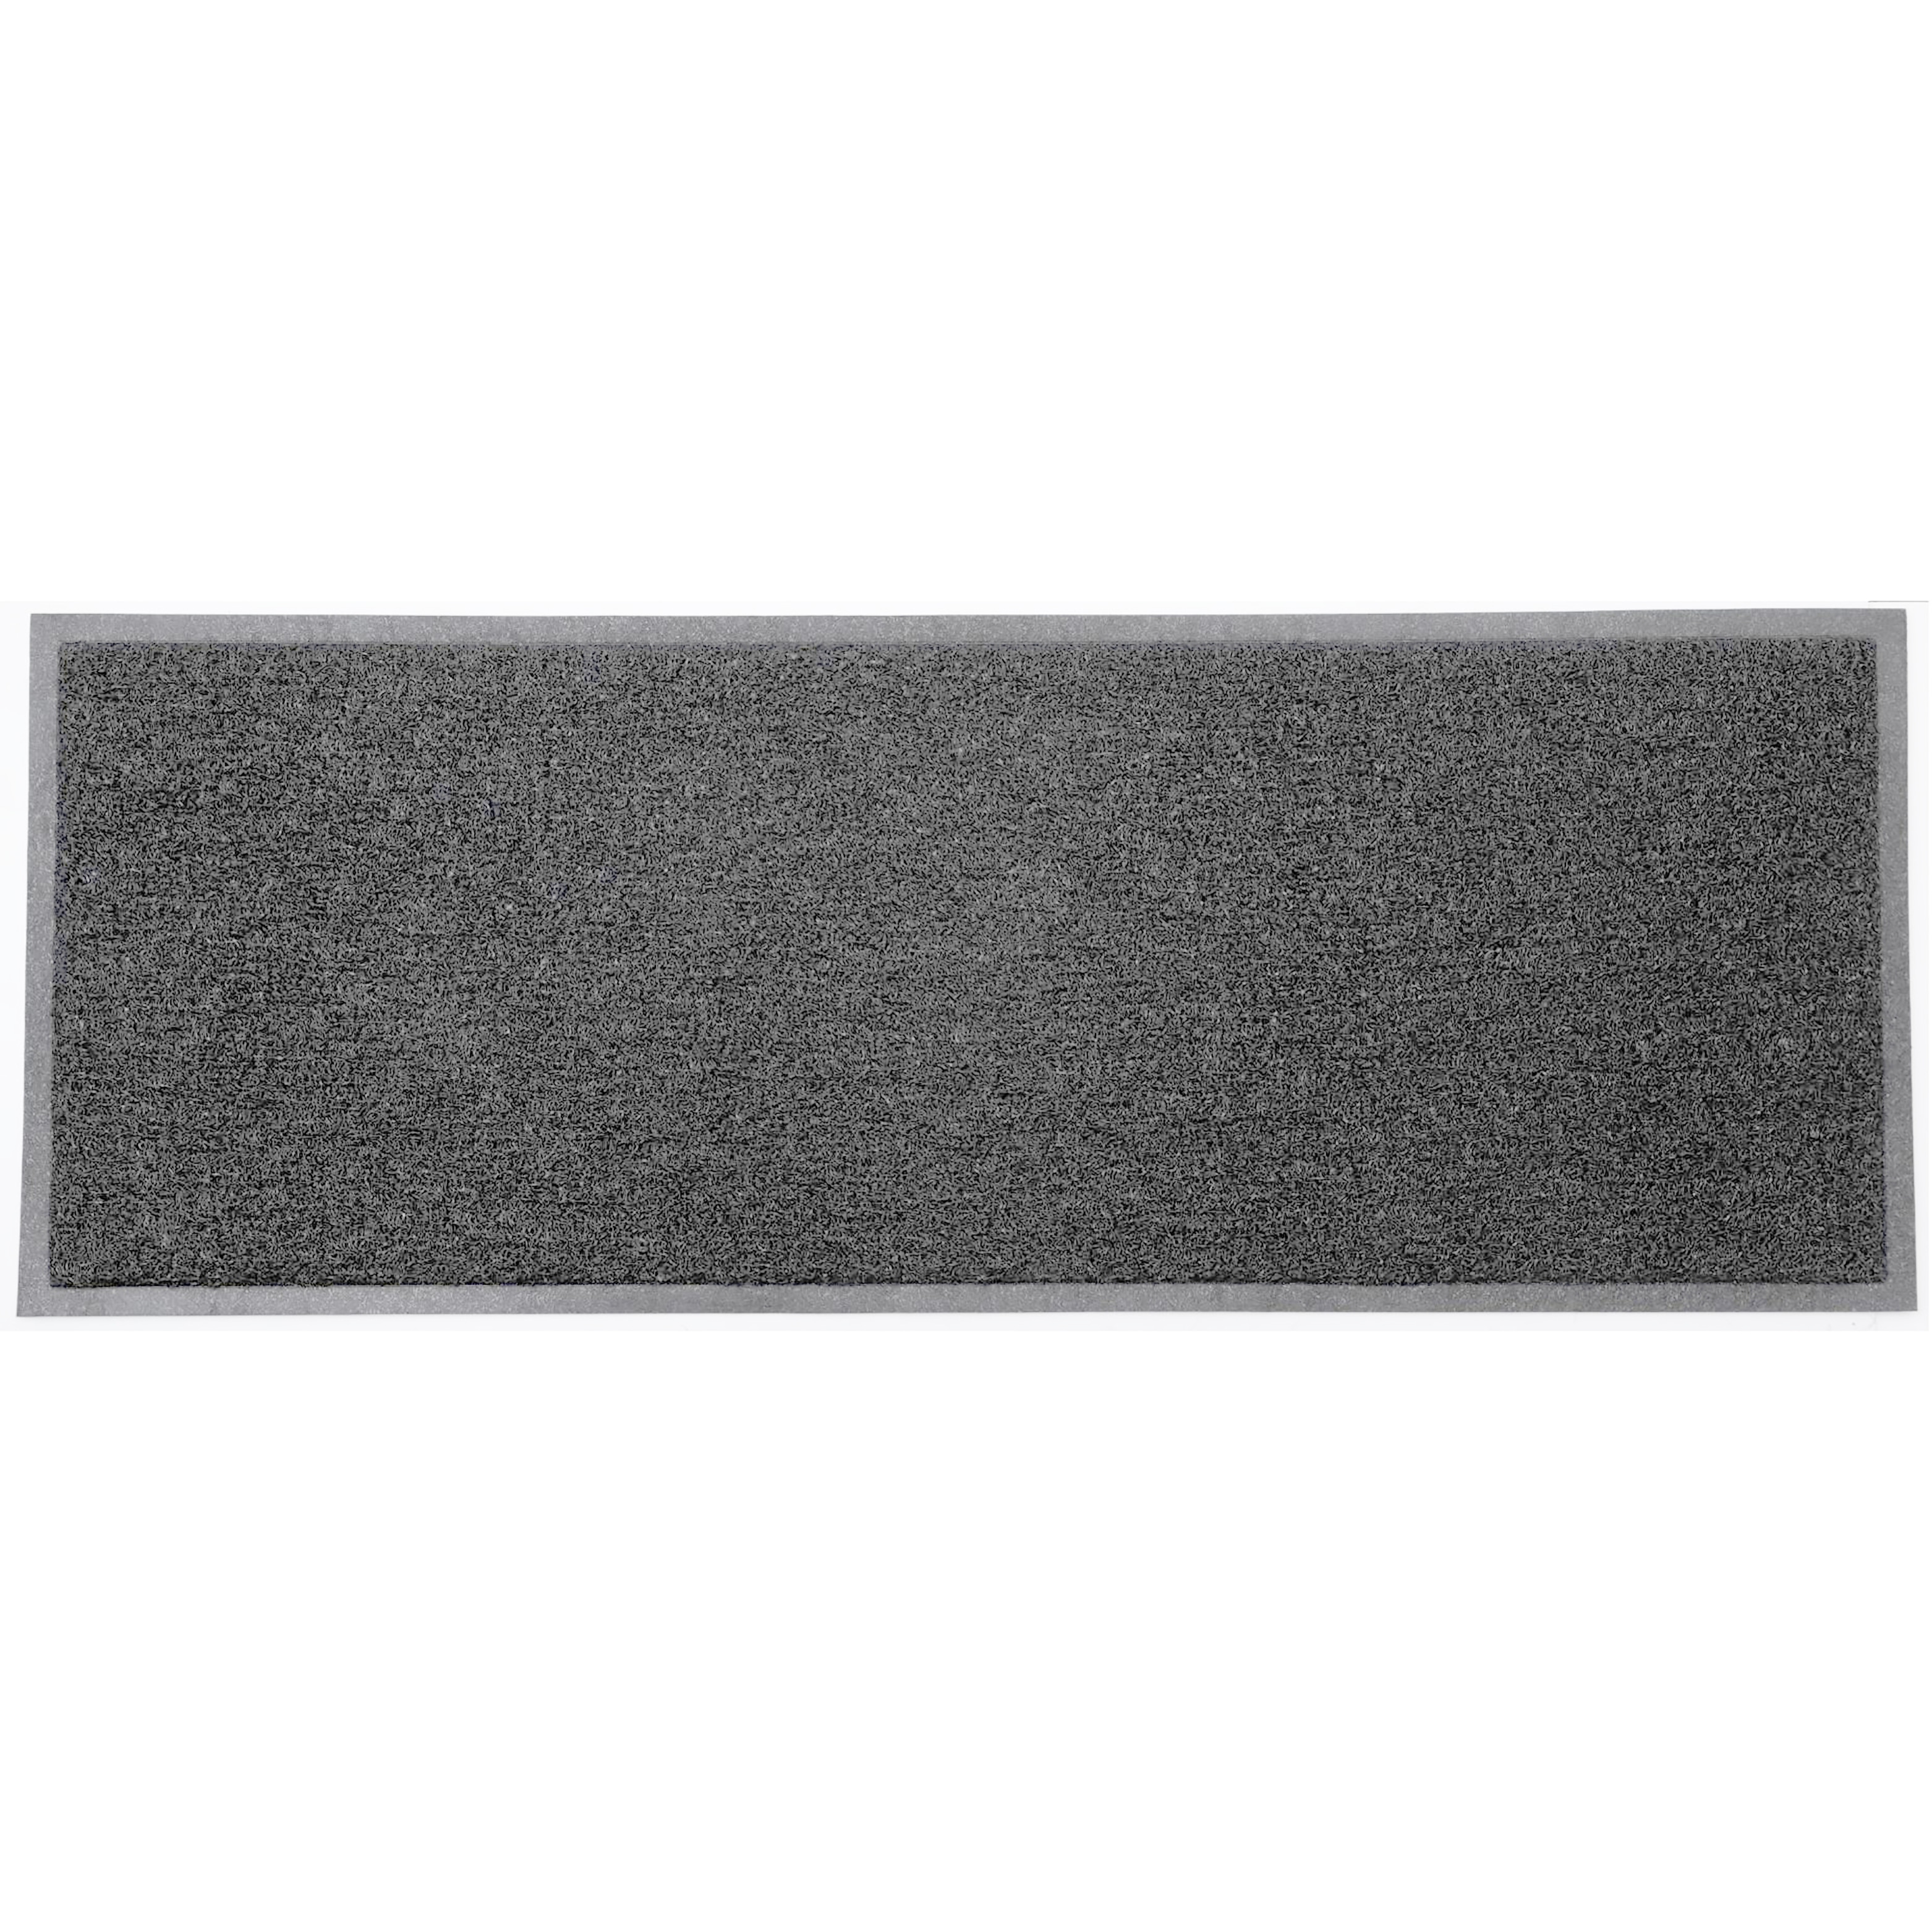 https://ak1.ostkcdn.com/images/products/is/images/direct/449951aed0a8d37931fd74a83e191a3179a62764/Outdoor-Extra-Large-Scraper-Door-Mat-Recycled-PVC-Non-Slip-Backing-48%22x18%22-Grey.jpg